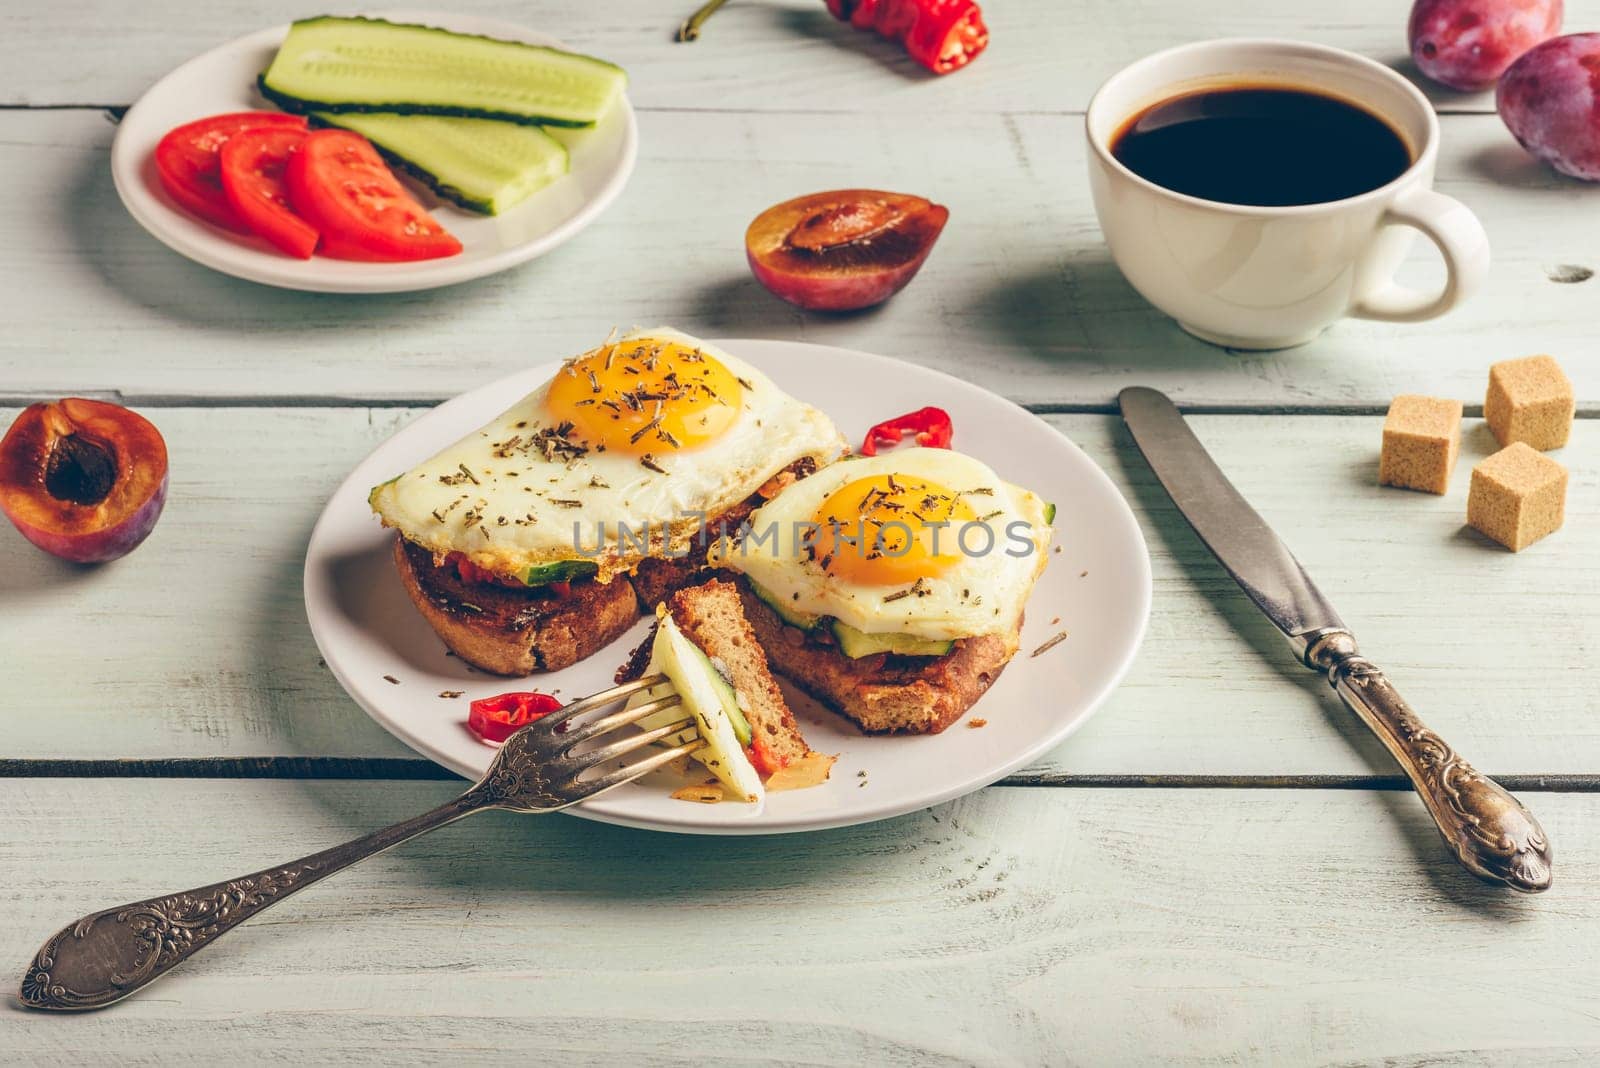 Sandwiches with vegetables and fried egg on white plate, cup of coffee and some fruits over wooden background.